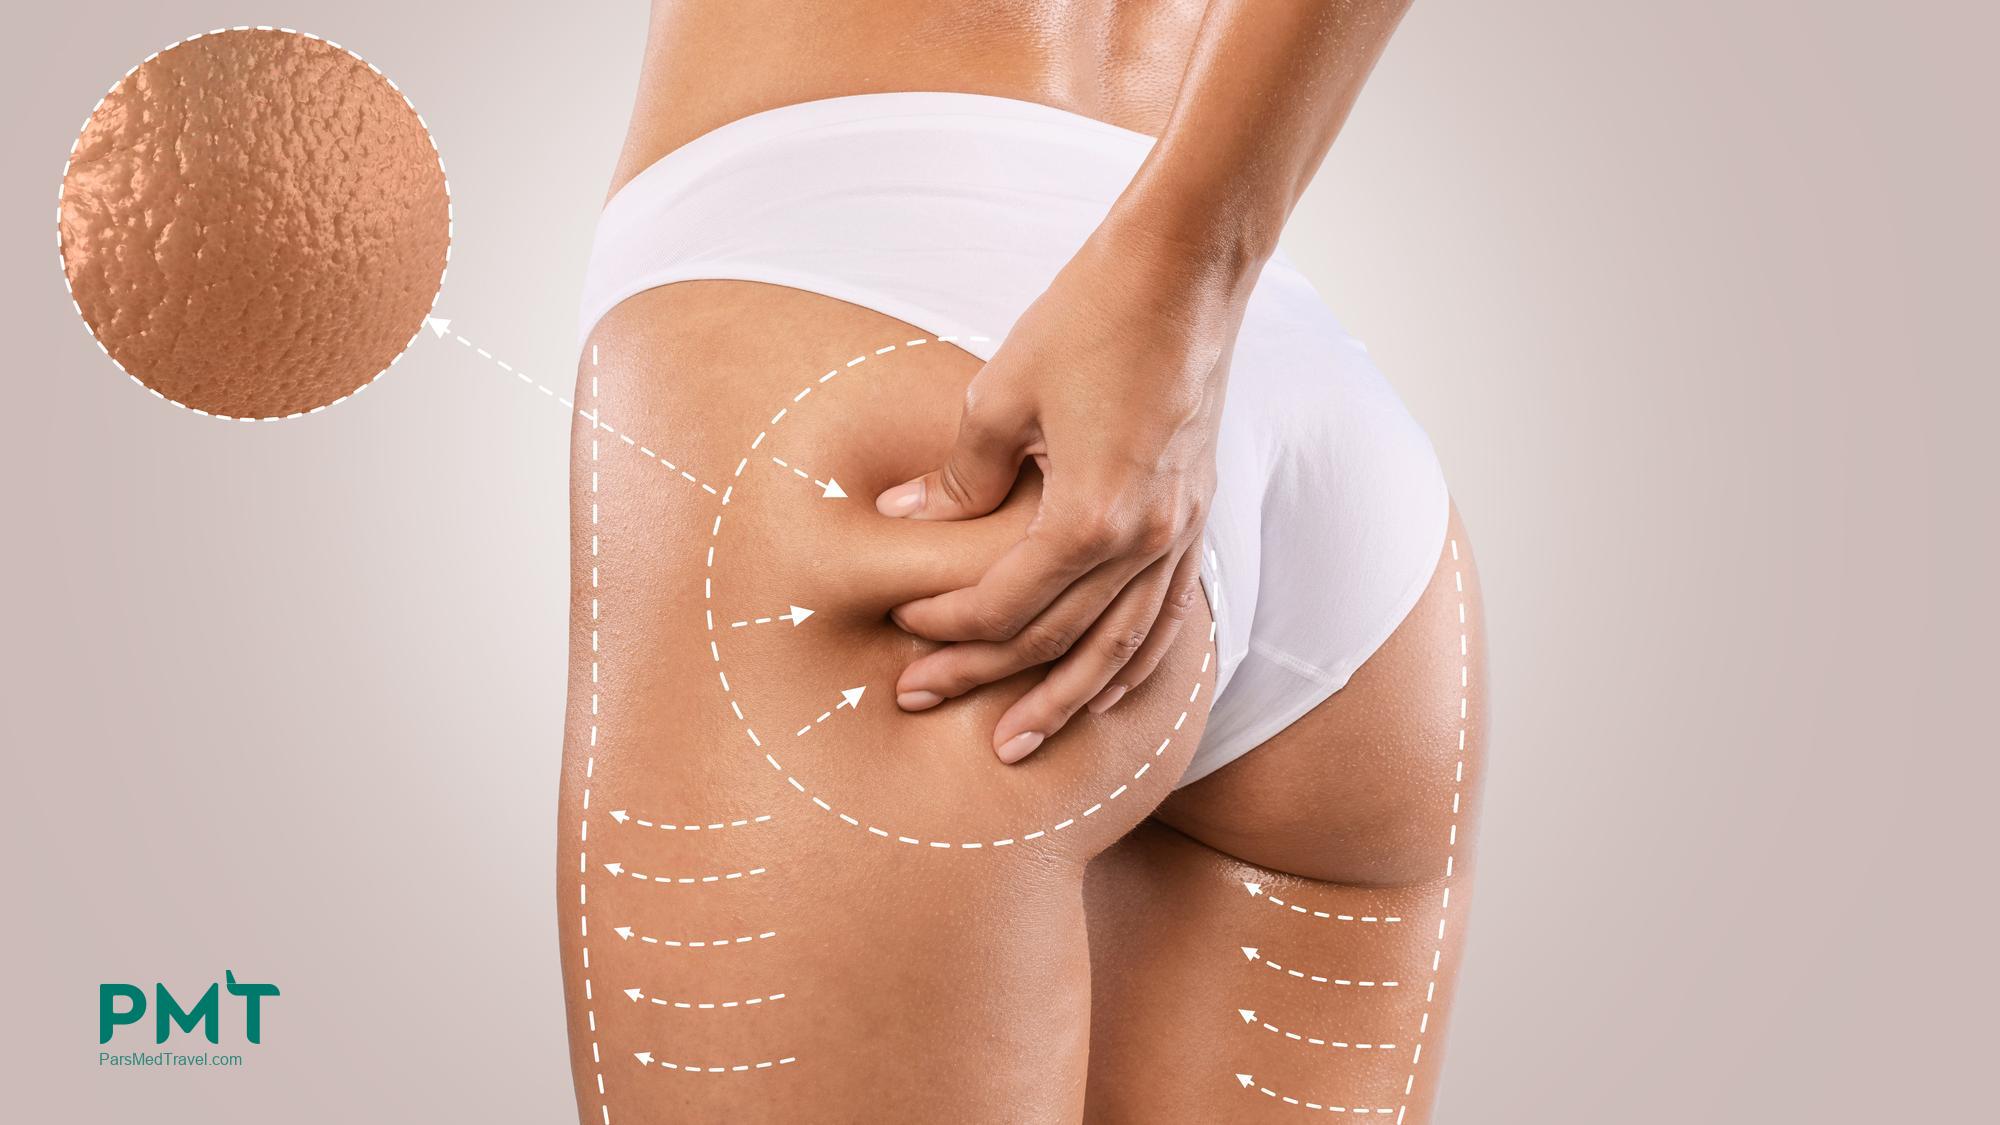 Butt cosmetic surgery & lift in iran | medical tourism guide & best price with parsmedtravel 2024